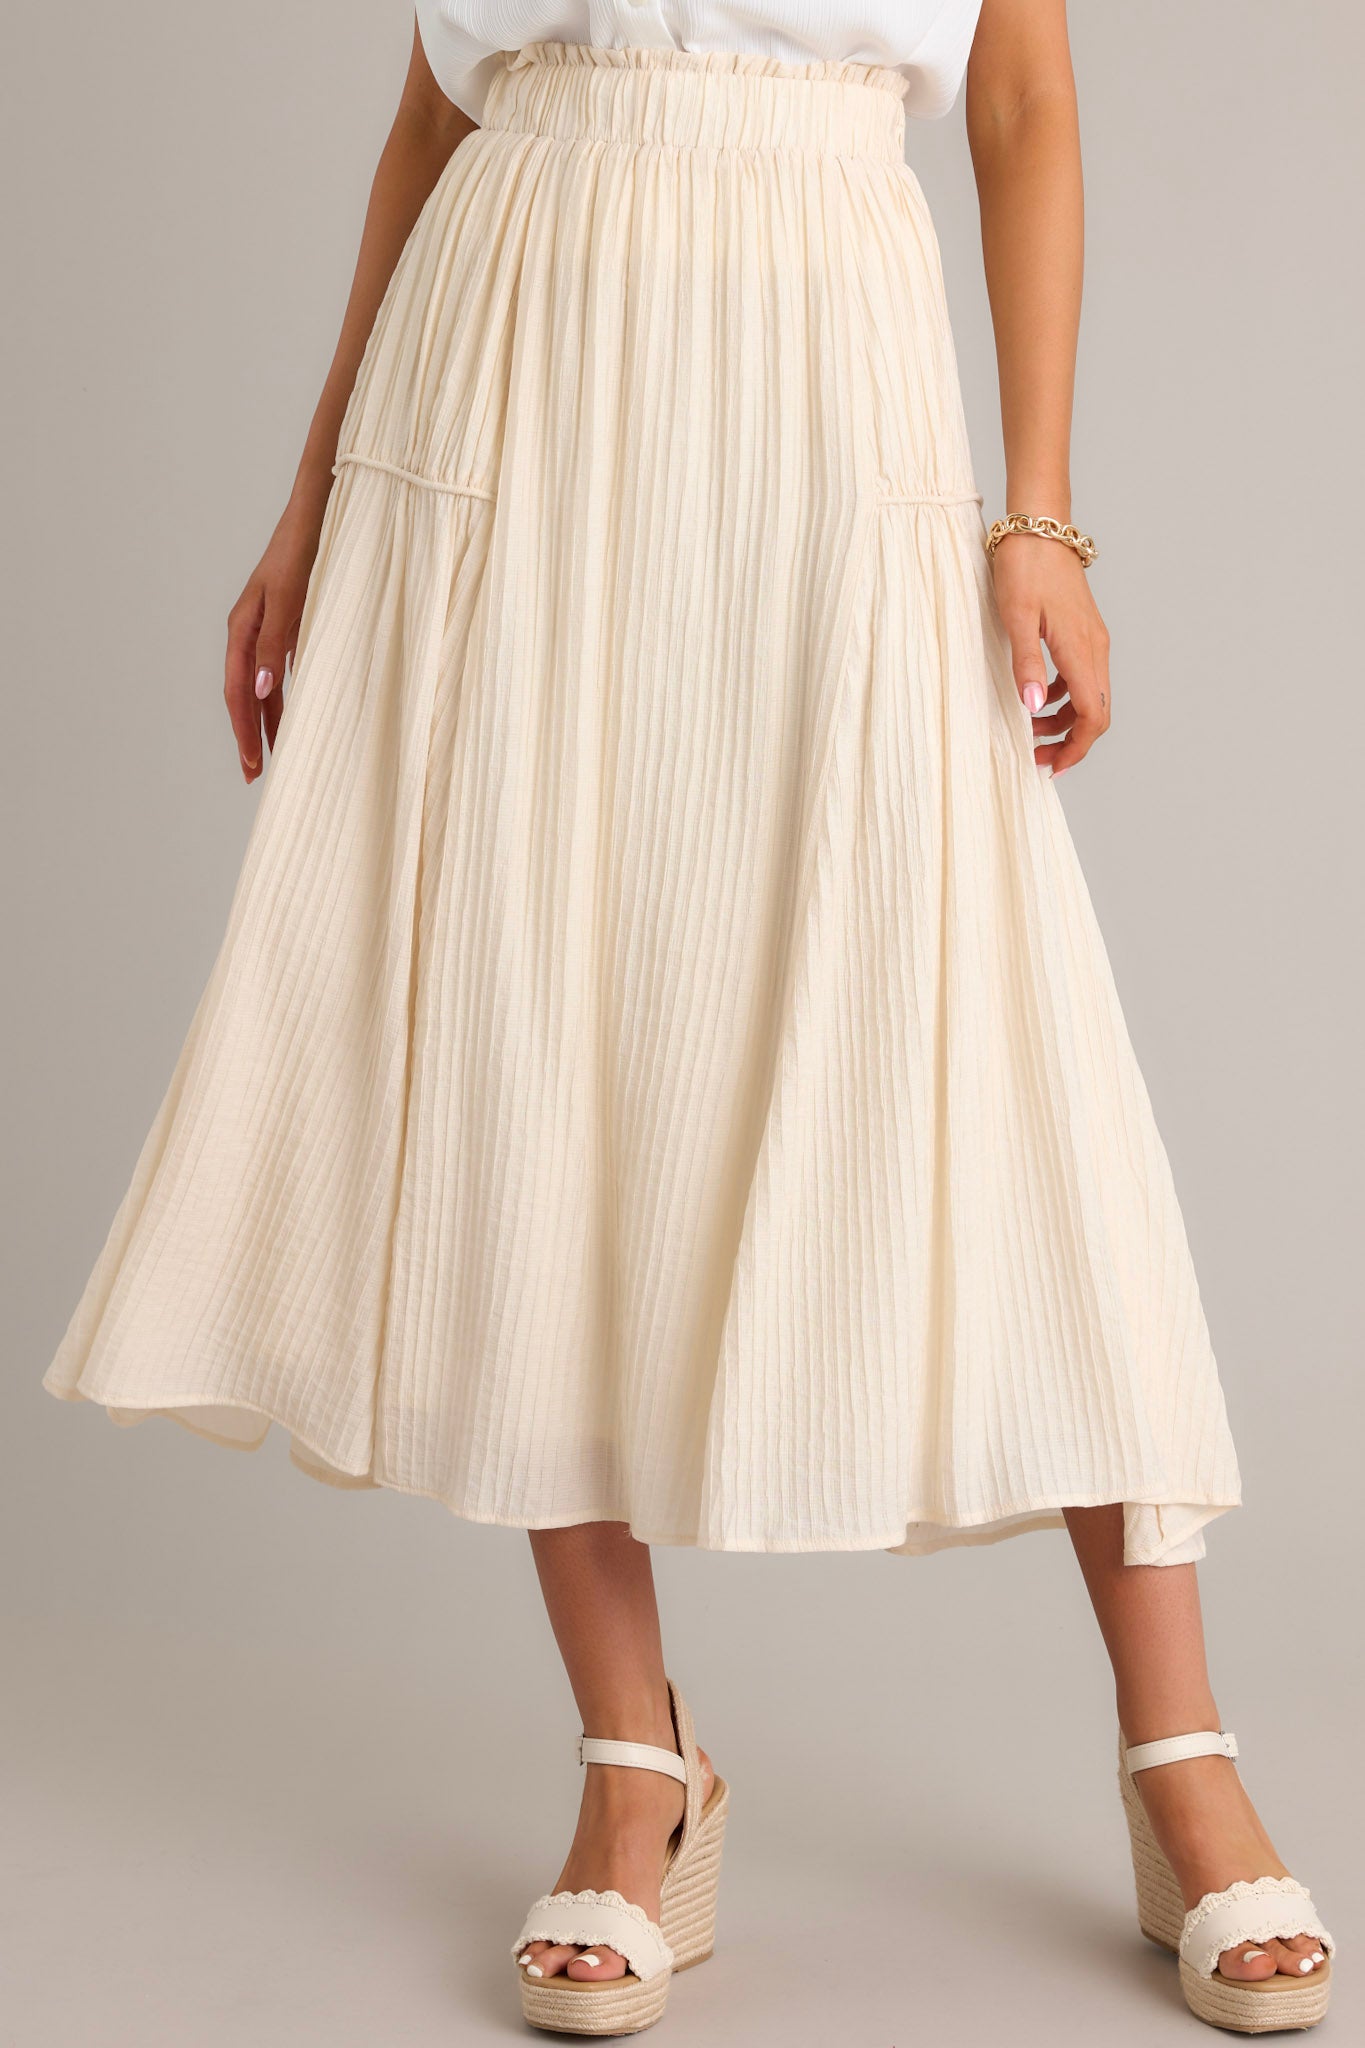 Front view of a beige maxi skirt featuring a high waist design, an elastic waistband, a ribbed texture, and a flowing silhouette.